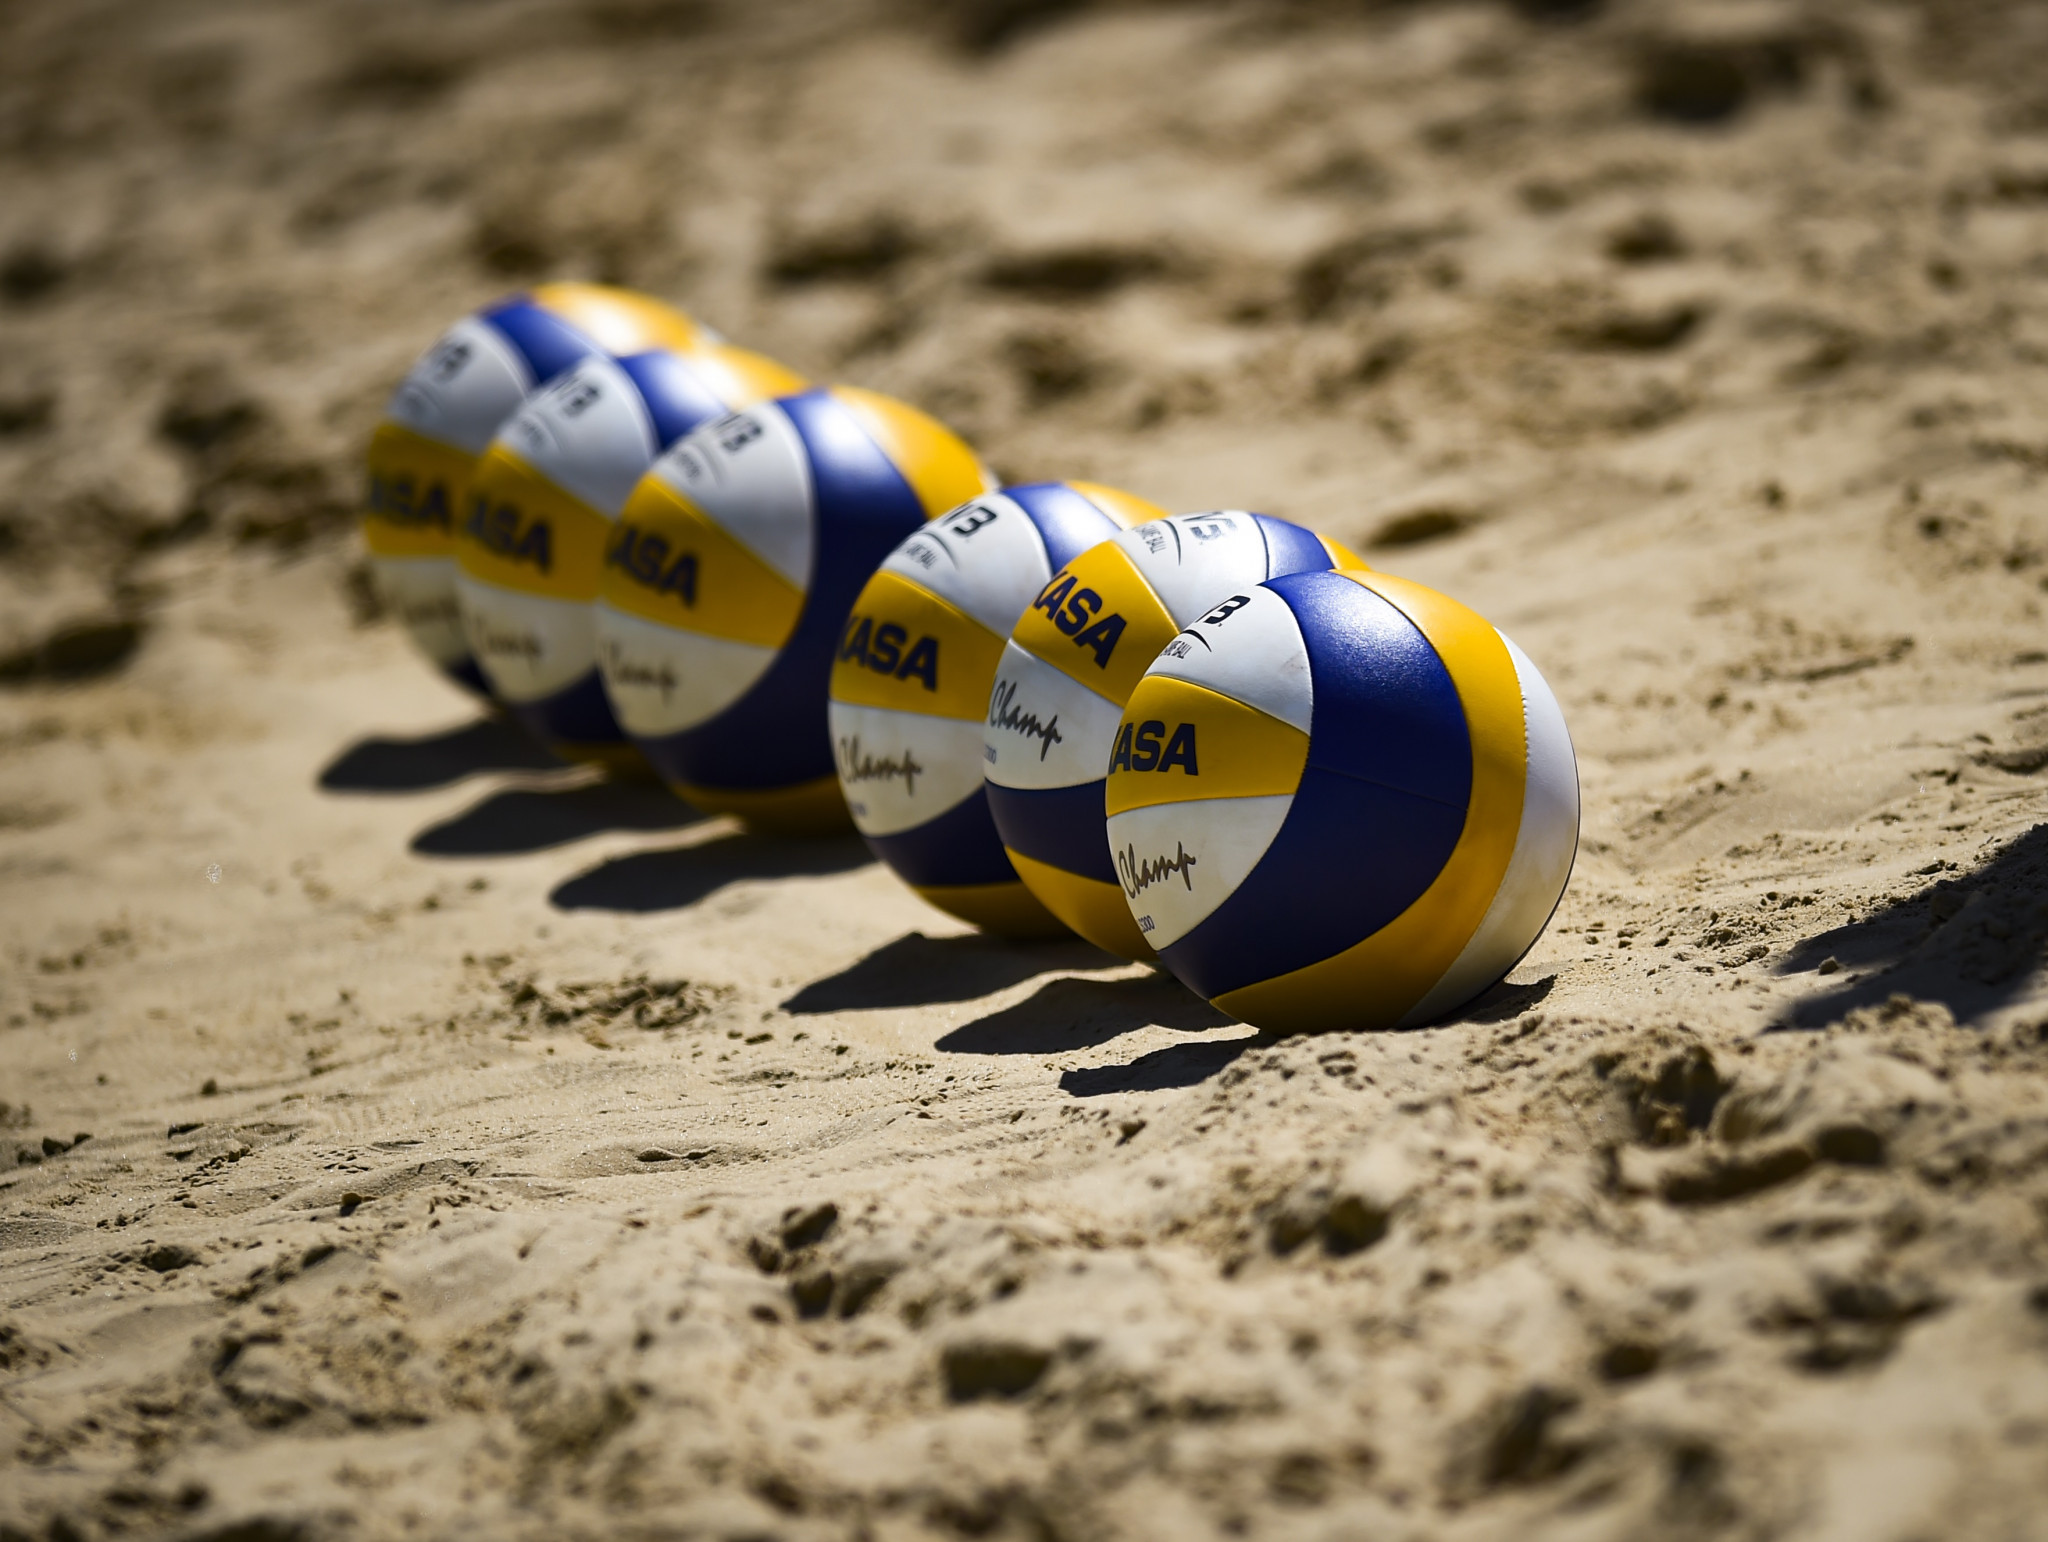 Ukraine claimed four beach volleyball medals after teams from the nation faced off in both the men's and women's finals ©Getty Images